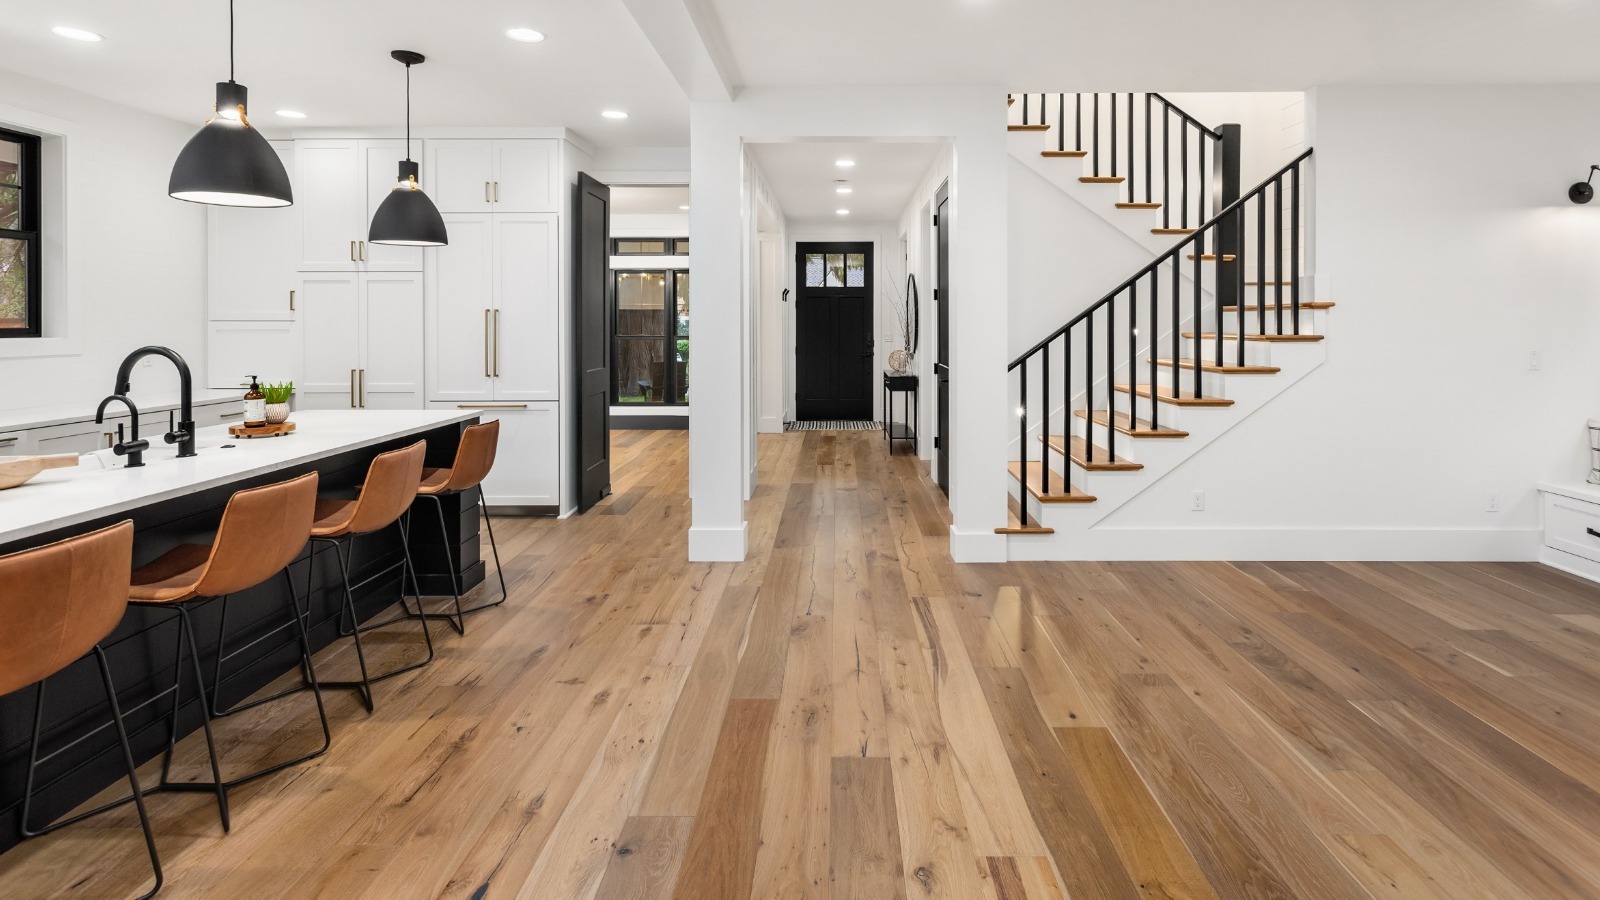 How Much Is Wood Flooring Sale Cheap, Save 55% | jlcatj.gob.mx